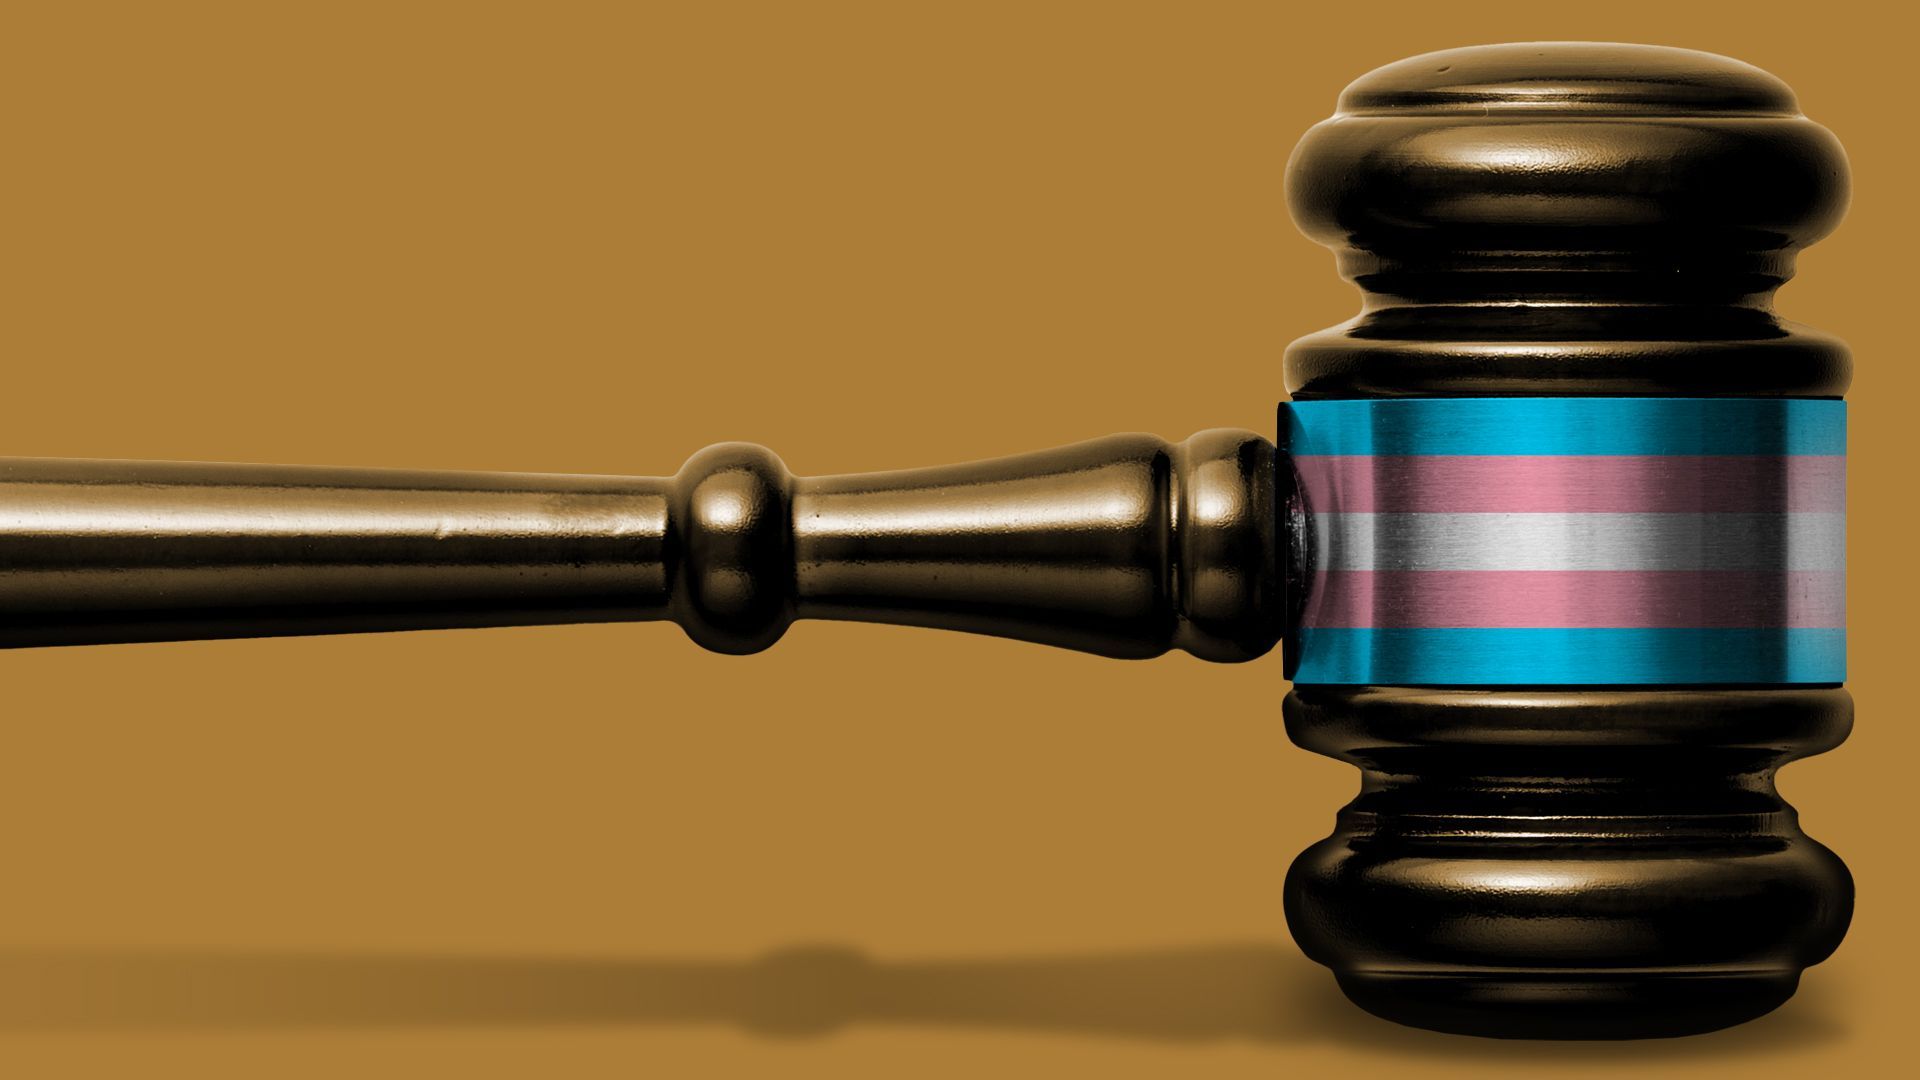 Illustration of a gavel with a trans flag on it